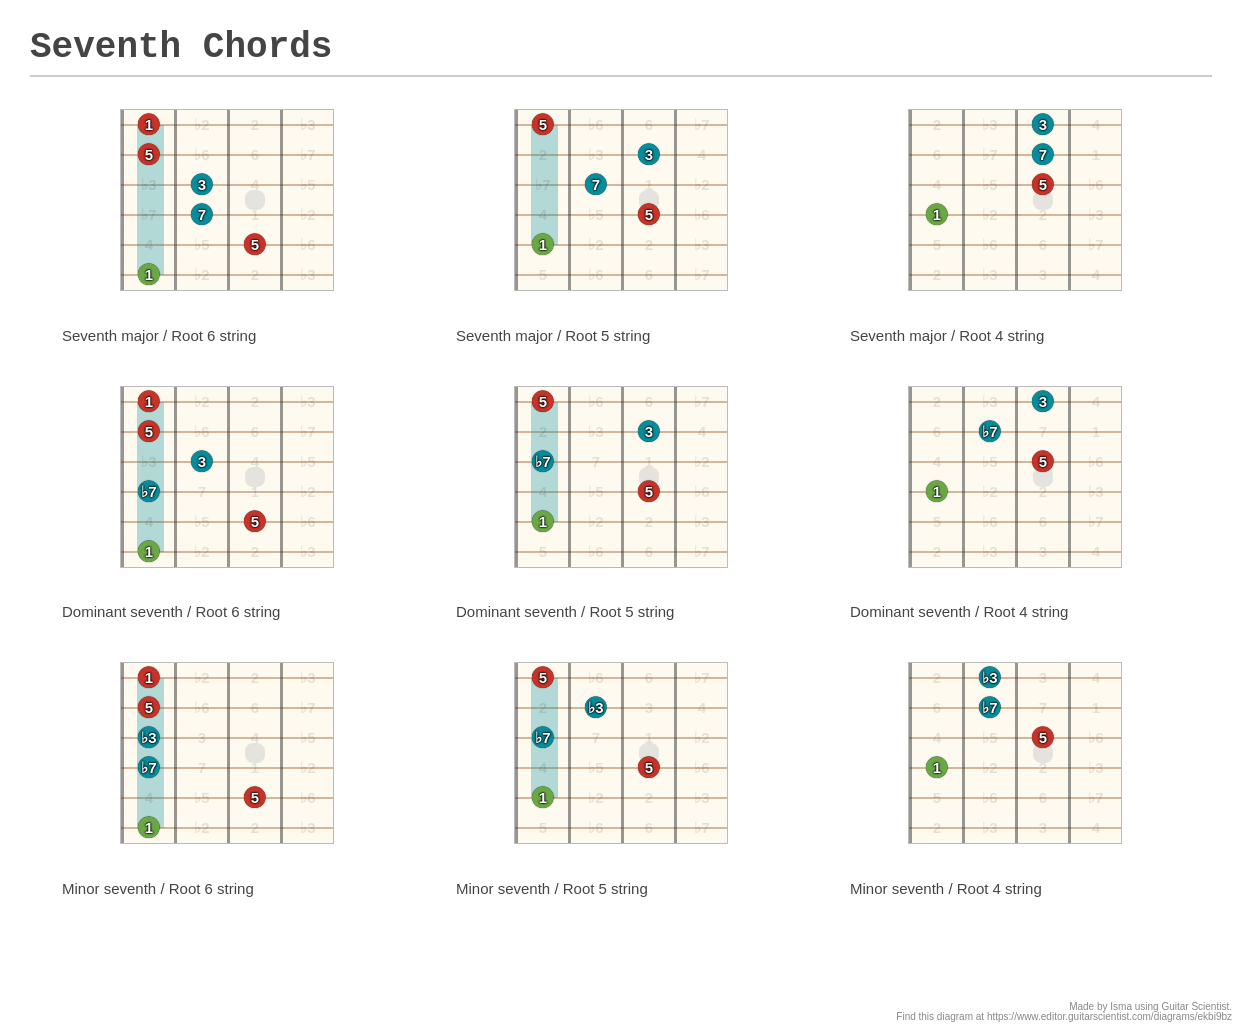 Seventh Chords - A fingering diagram made with Guitar Scientist